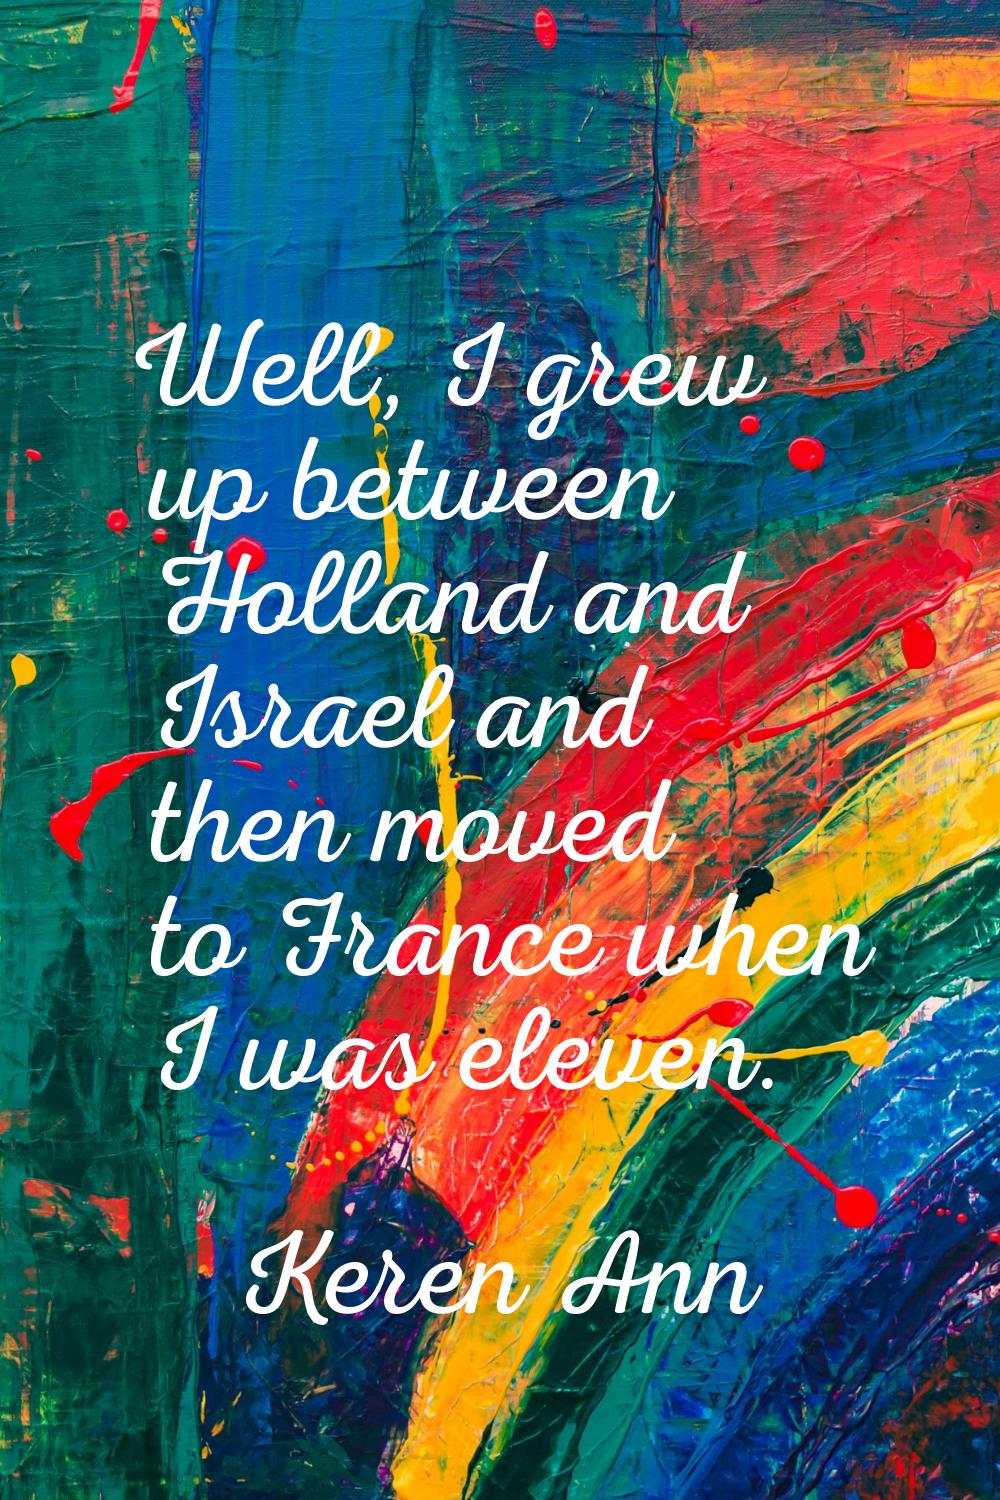 Well, I grew up between Holland and Israel and then moved to France when I was eleven.